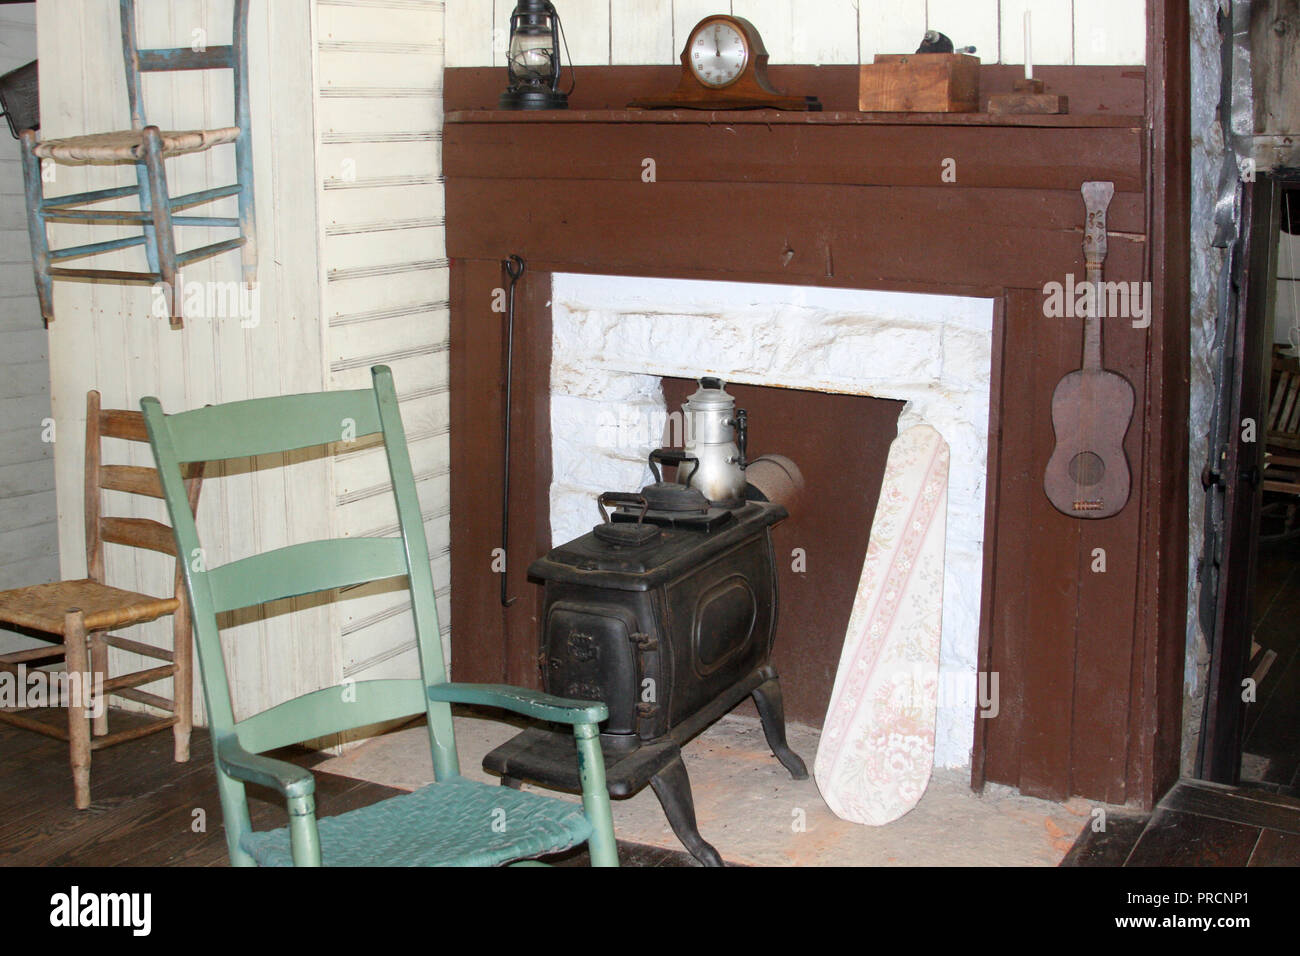 Simple room with wood stove in historical mountain house in Virginia's Blue Ridge Parkway. Johnson Farm, 1930. Stock Photo